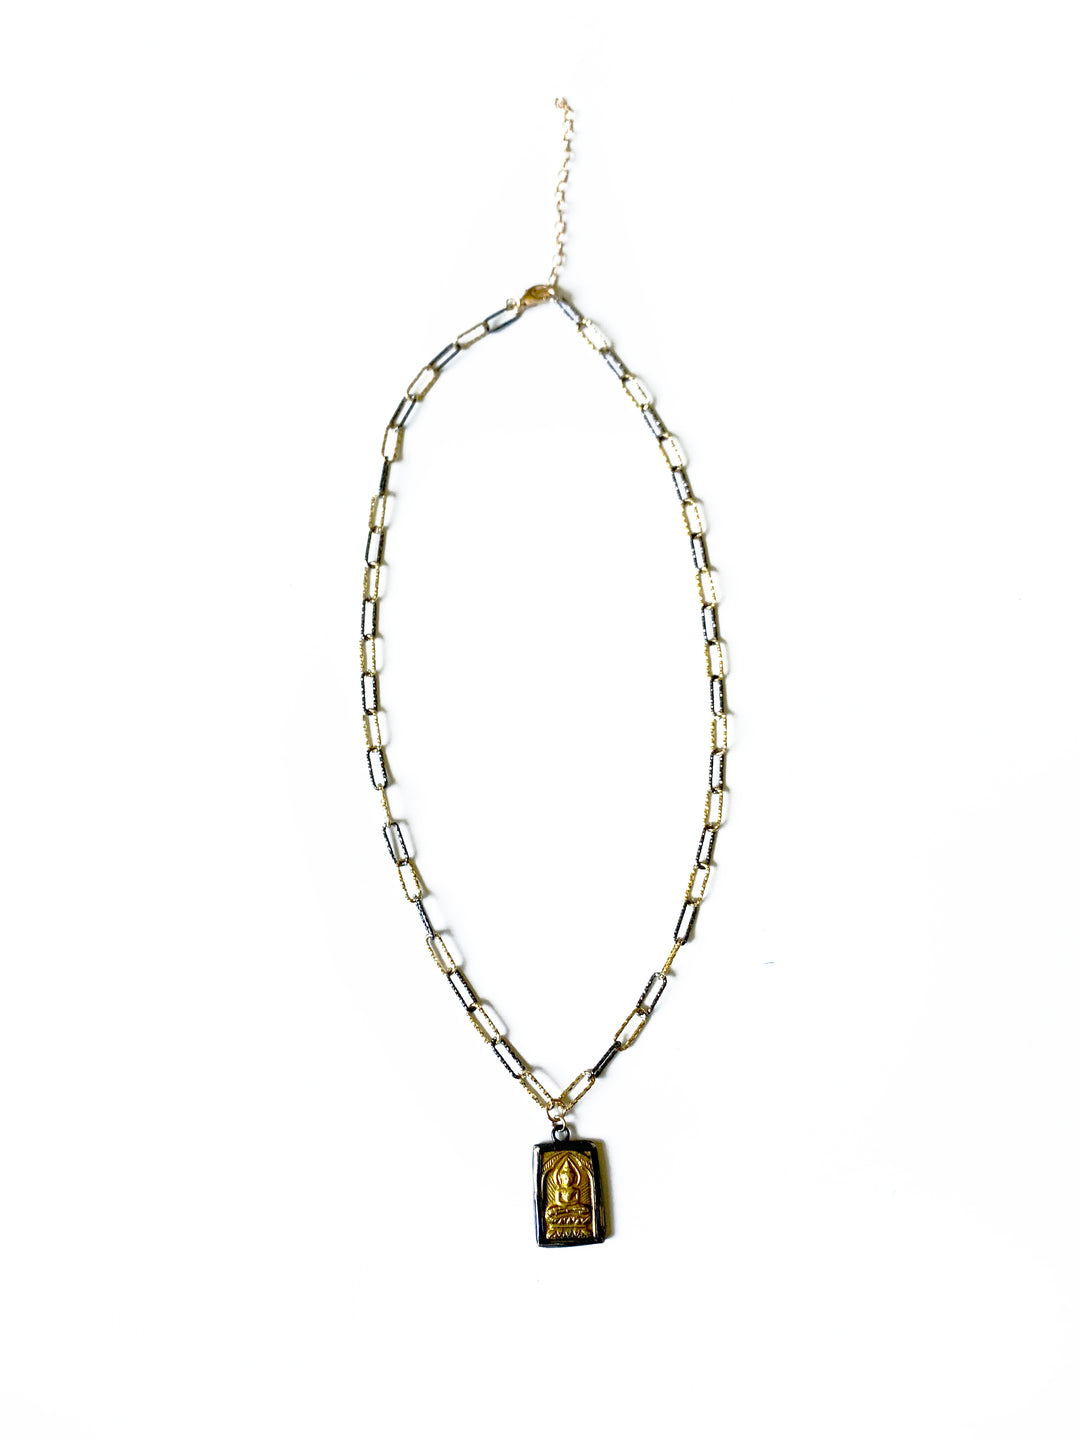 Mixed Metal Chain With Buddha - Kingfisher Road - Online Boutique